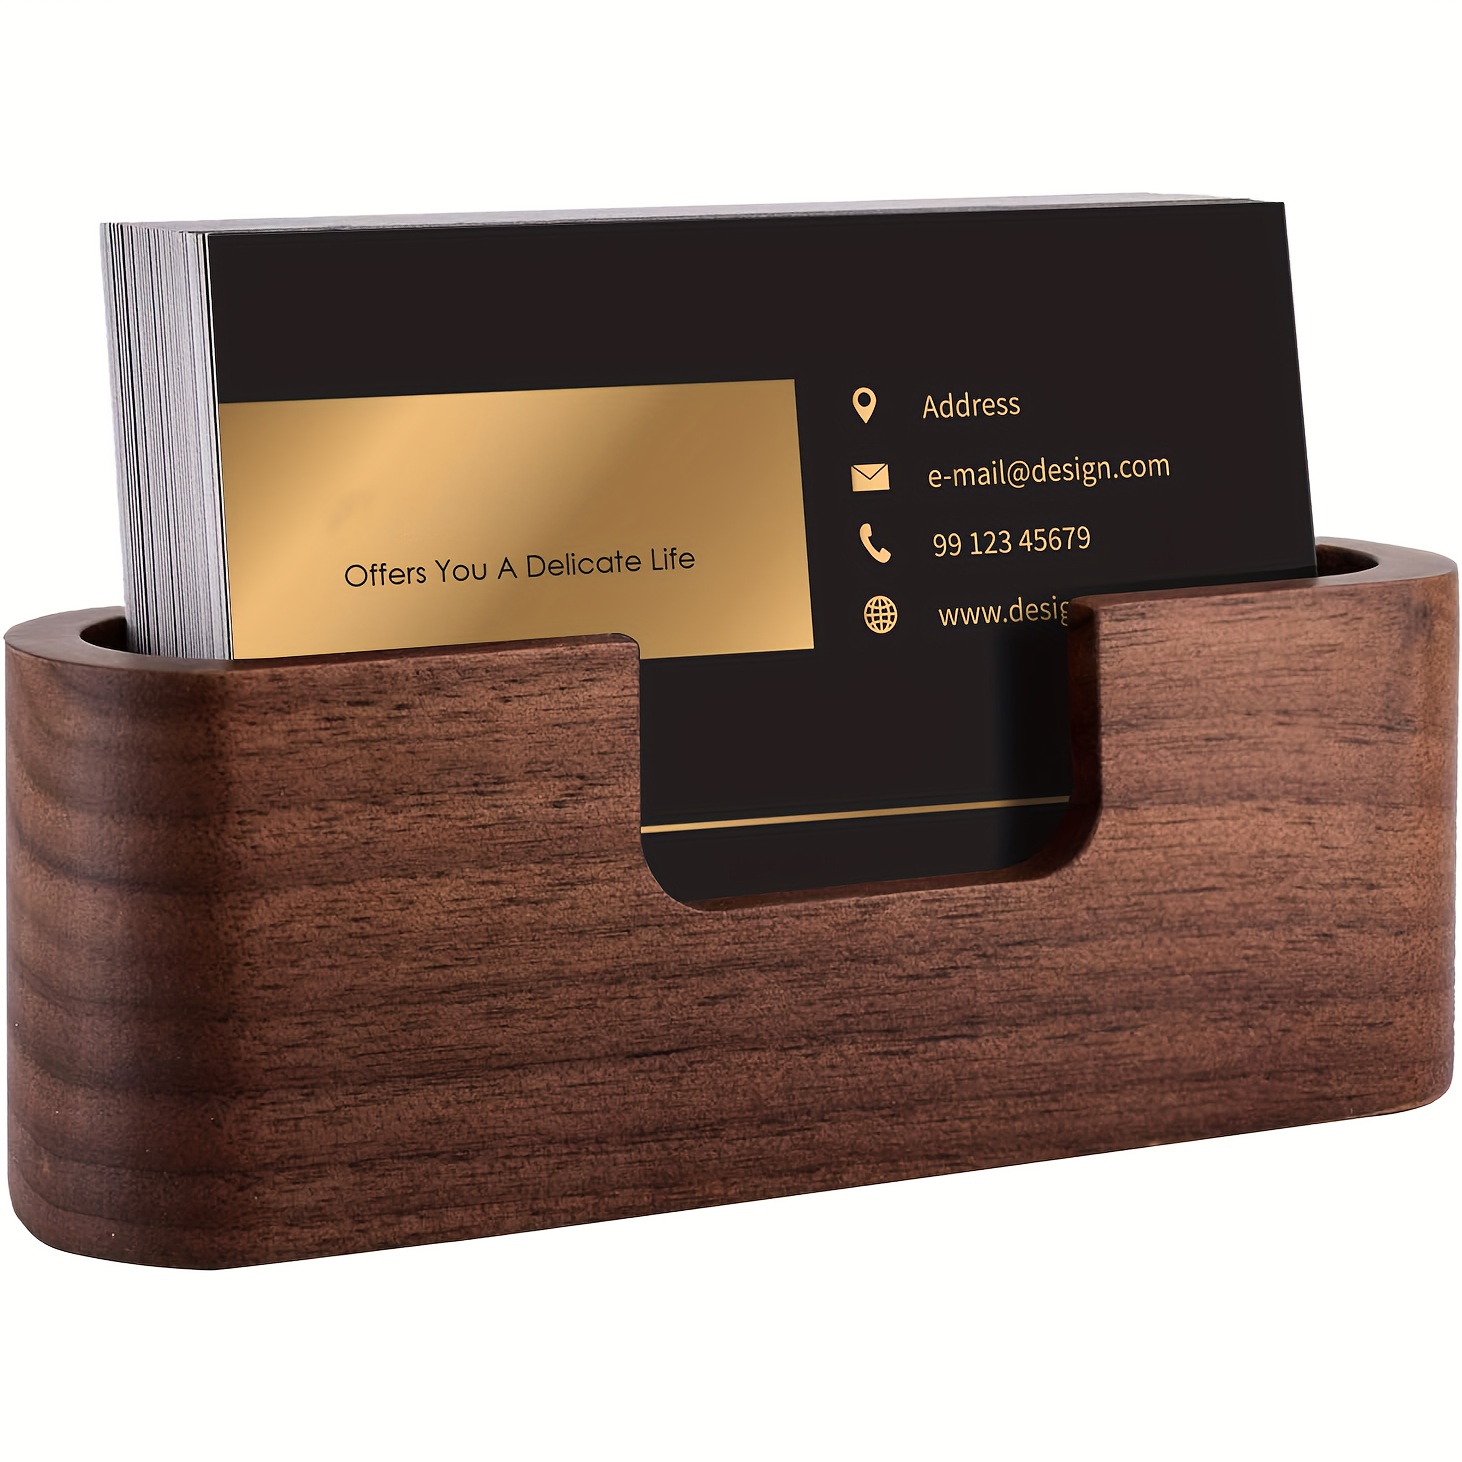  MaxGear Wood Business Cards Holder for Desk Business